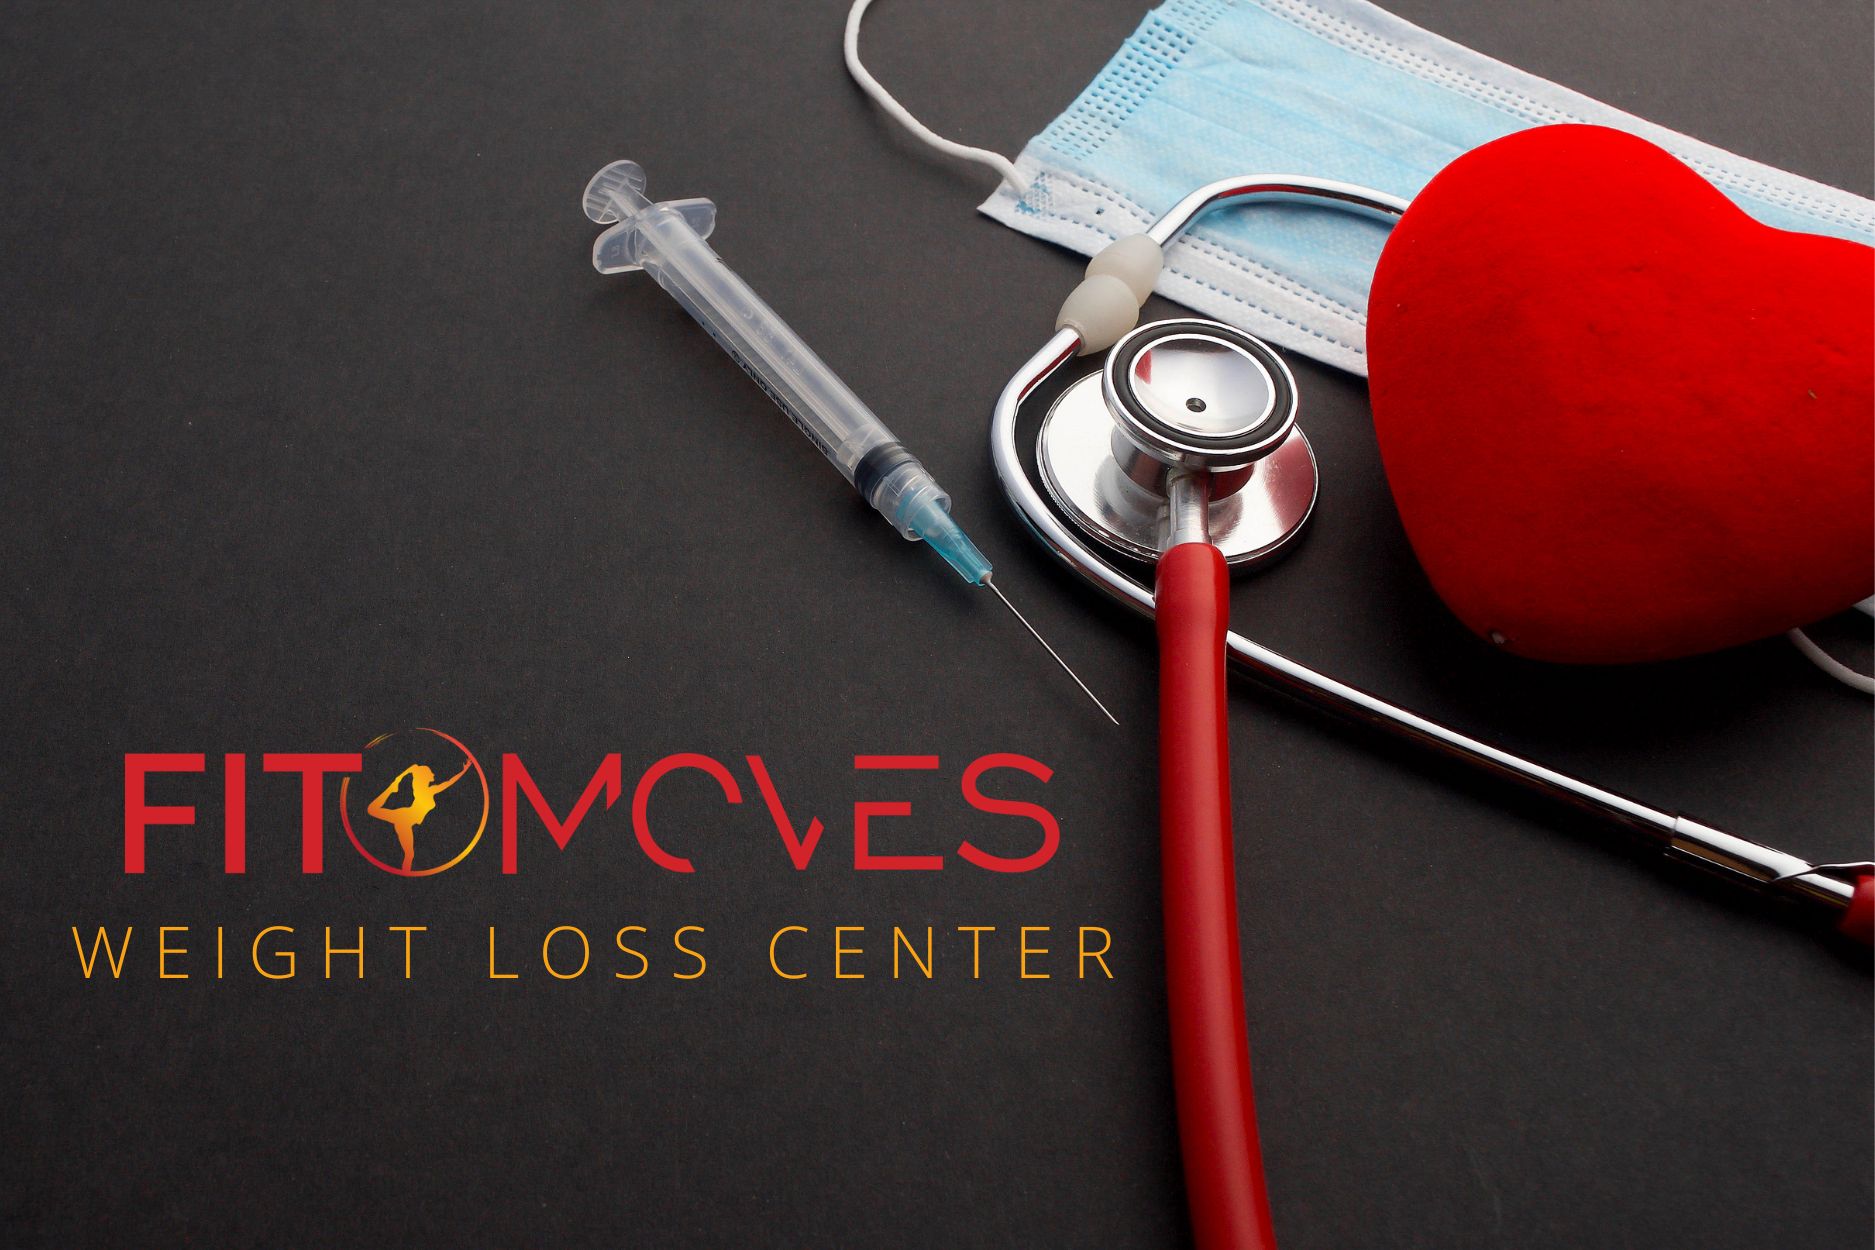 Learn More About FitMoves WEight Loss Center